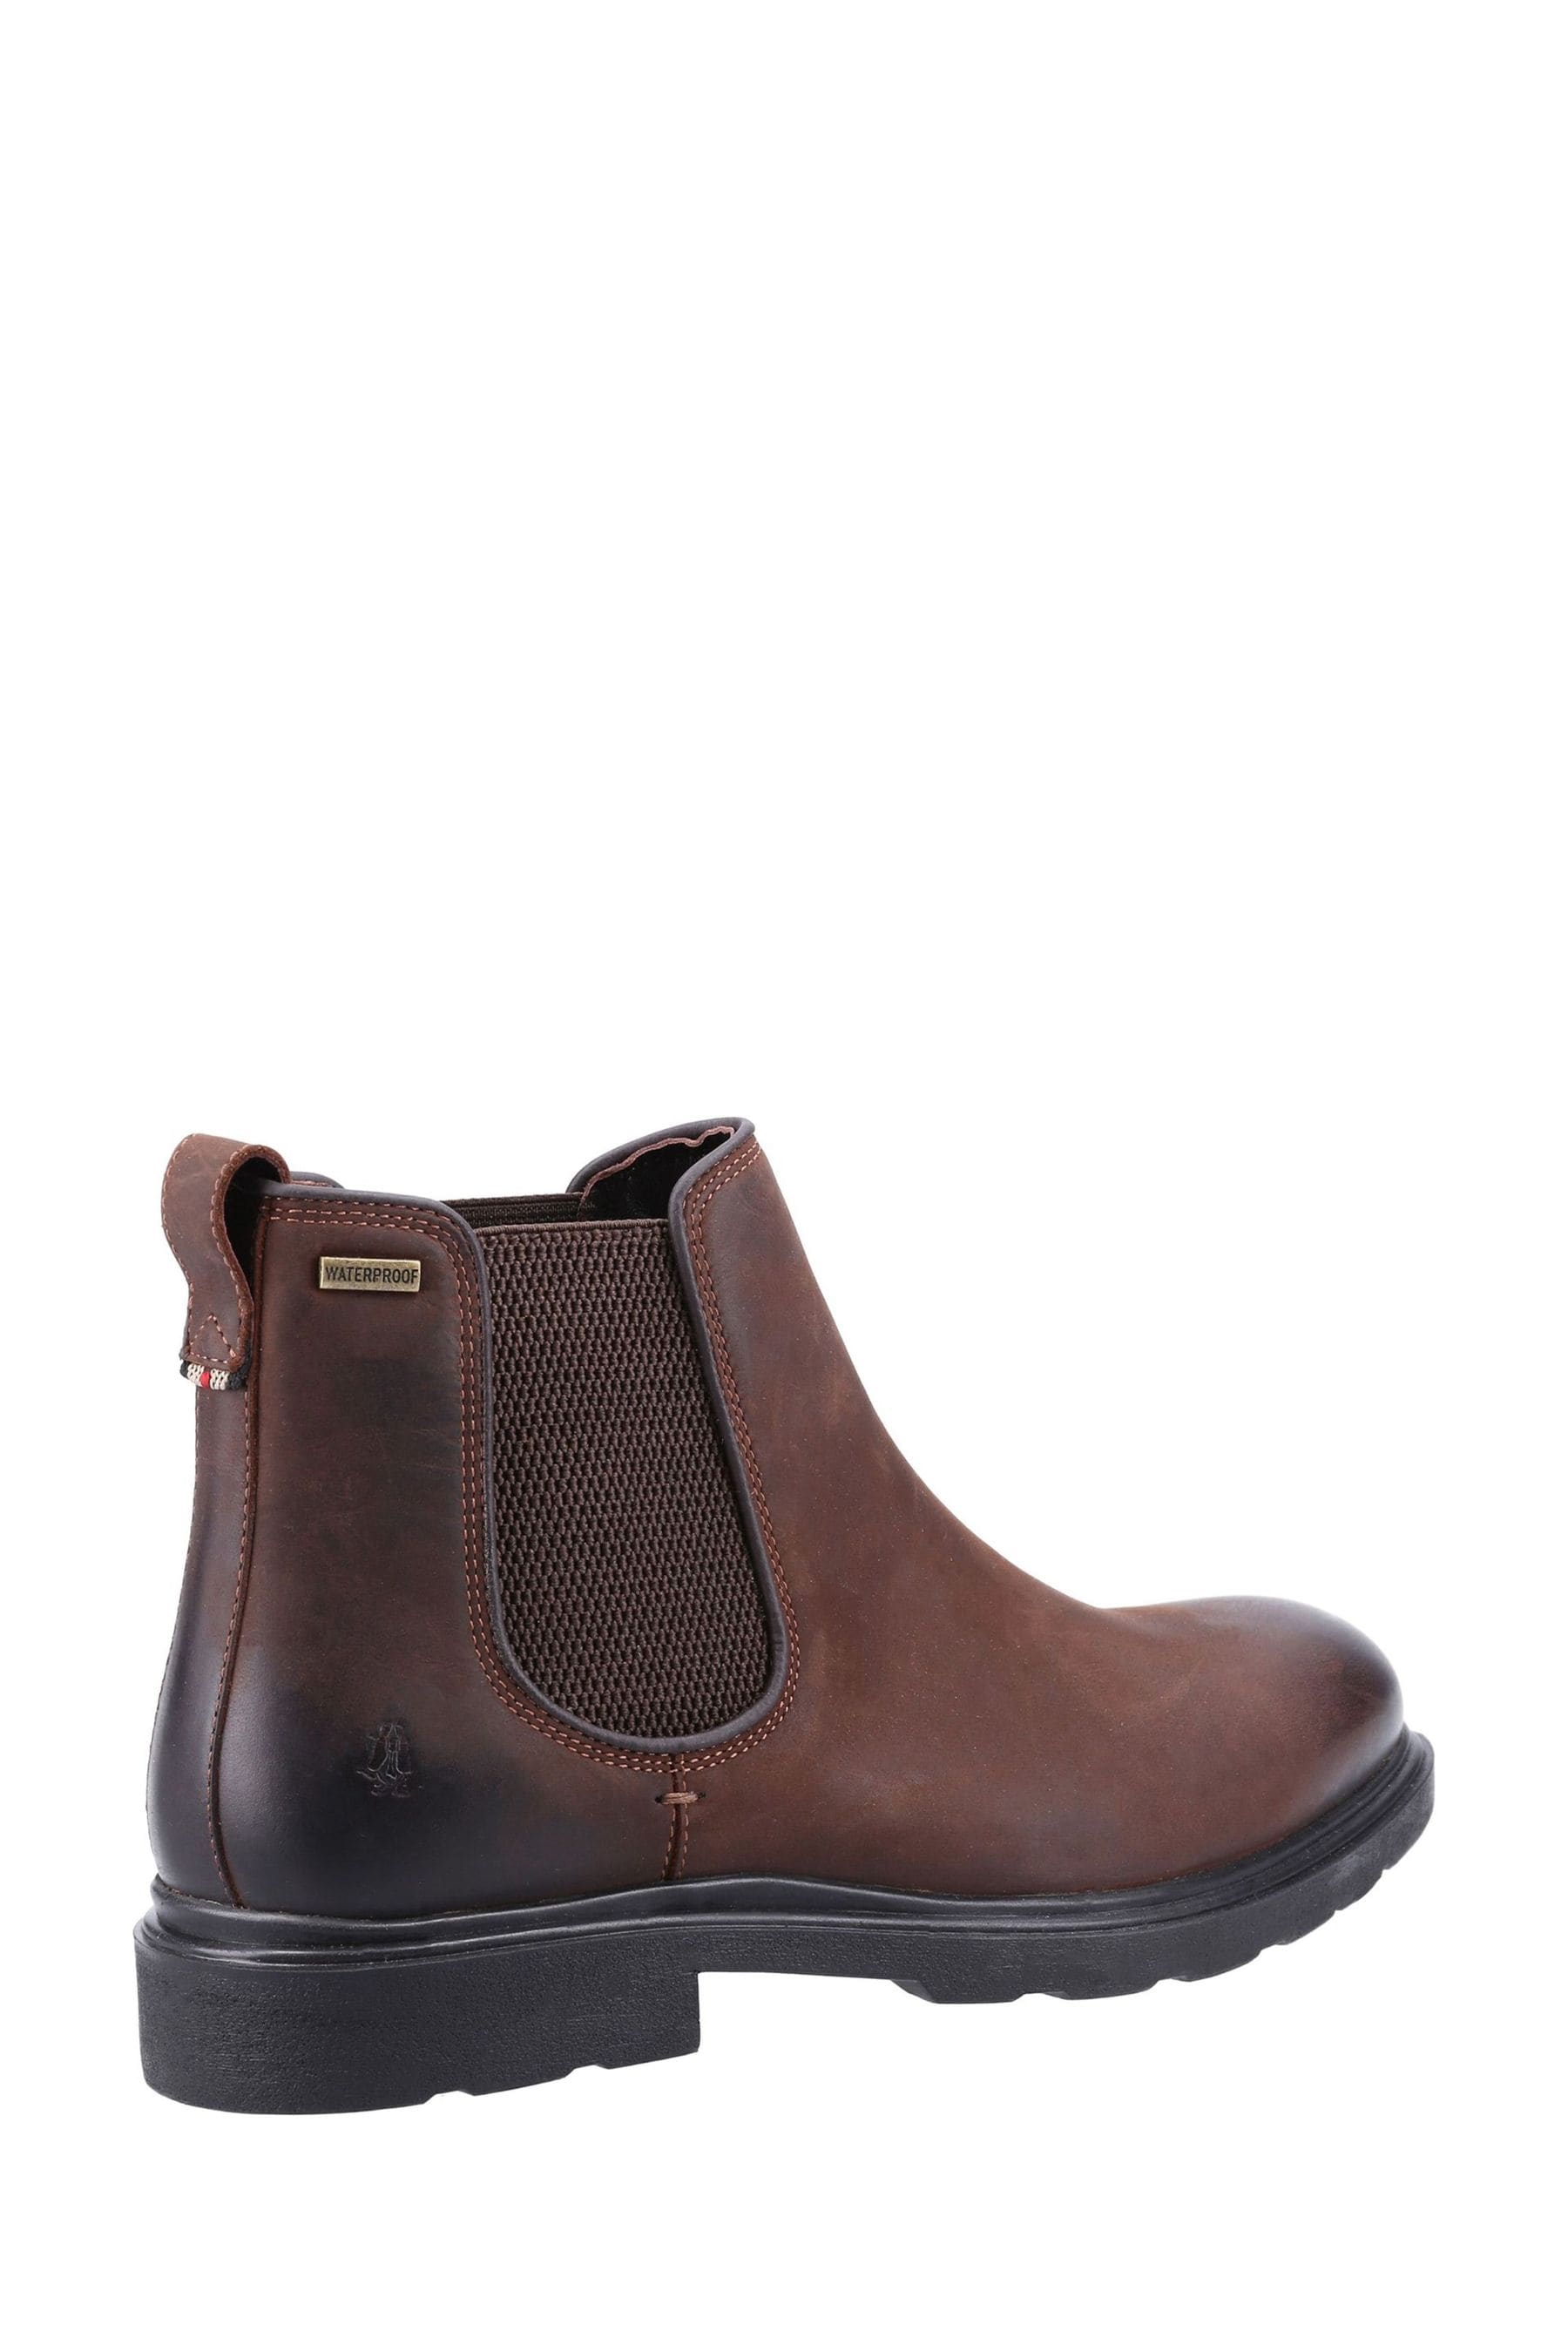 Buy Hush Puppies Tan Preston Chelsea Boots from the Next UK online shop